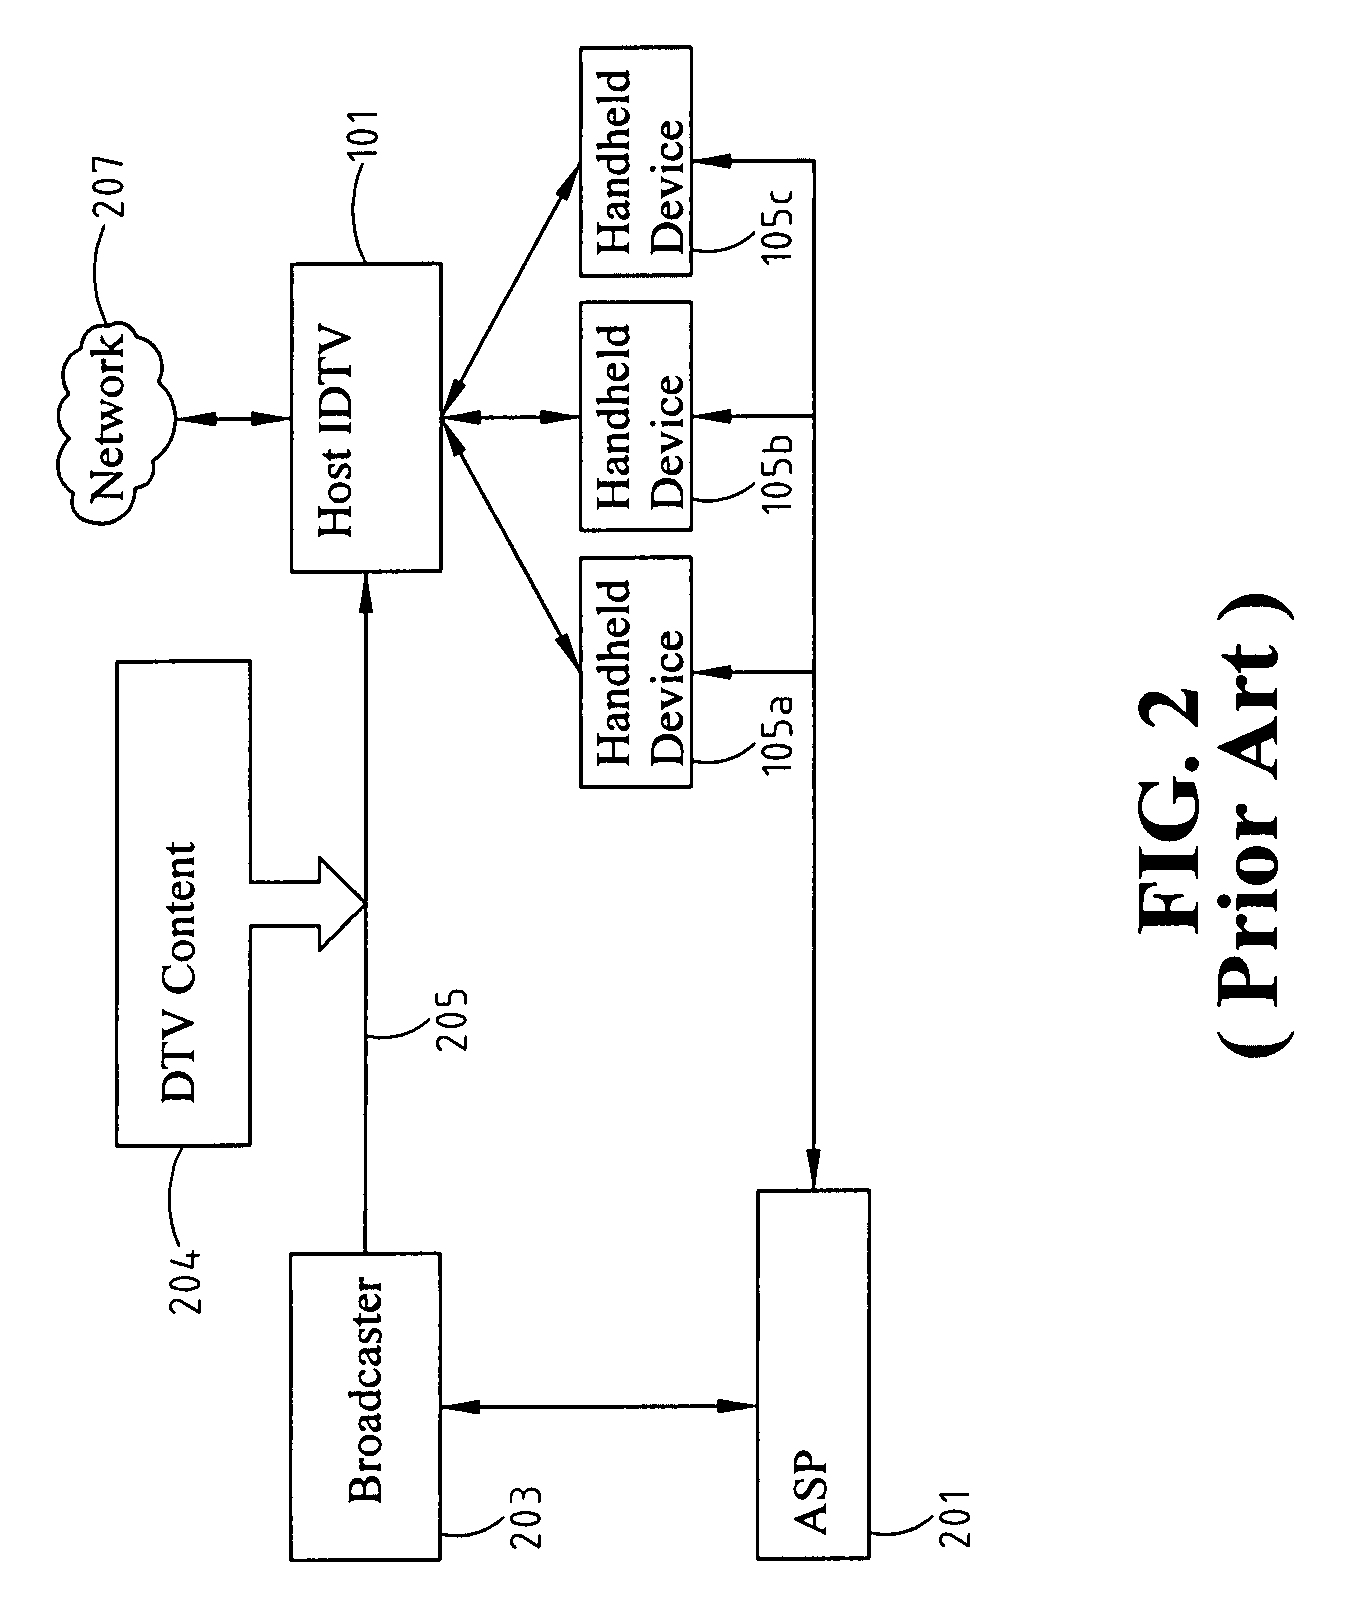 System and method of dual-screen interactive digital television